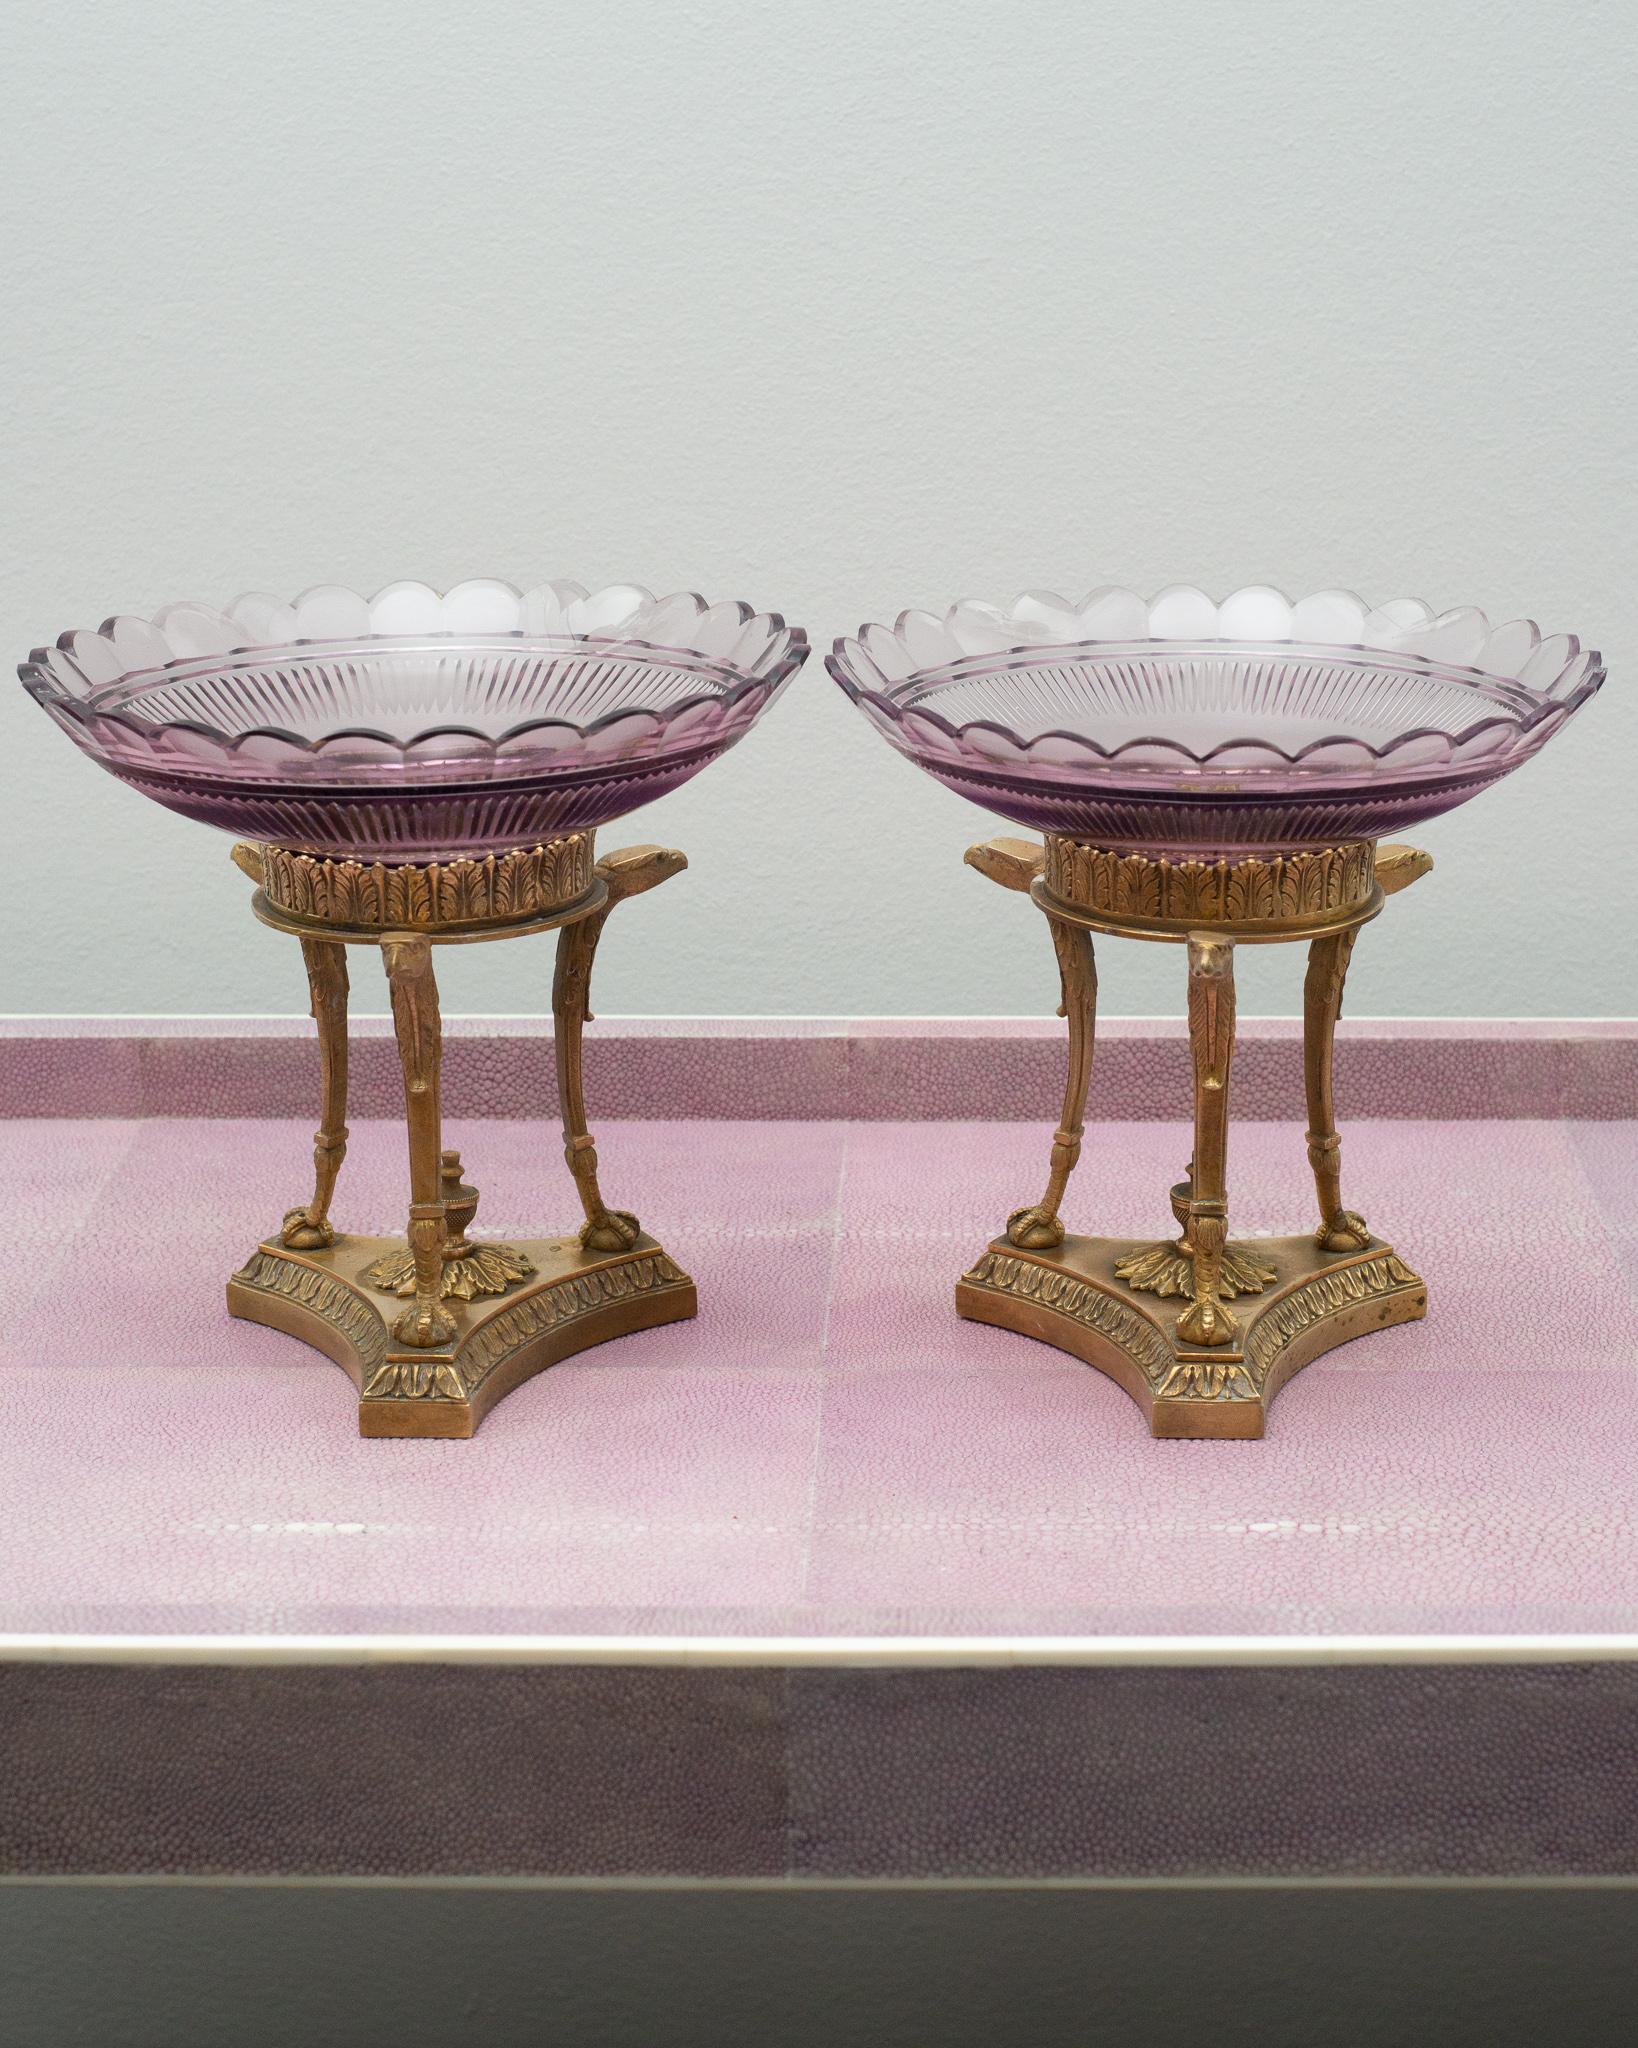 A beautiful pair of antique French compotes / tazzas / bowls with bronze mount featuring Griffin motif. Both bronze and crystal are in very good condition for their age. The light purple crystal is expertly hand cut with radial decoration and